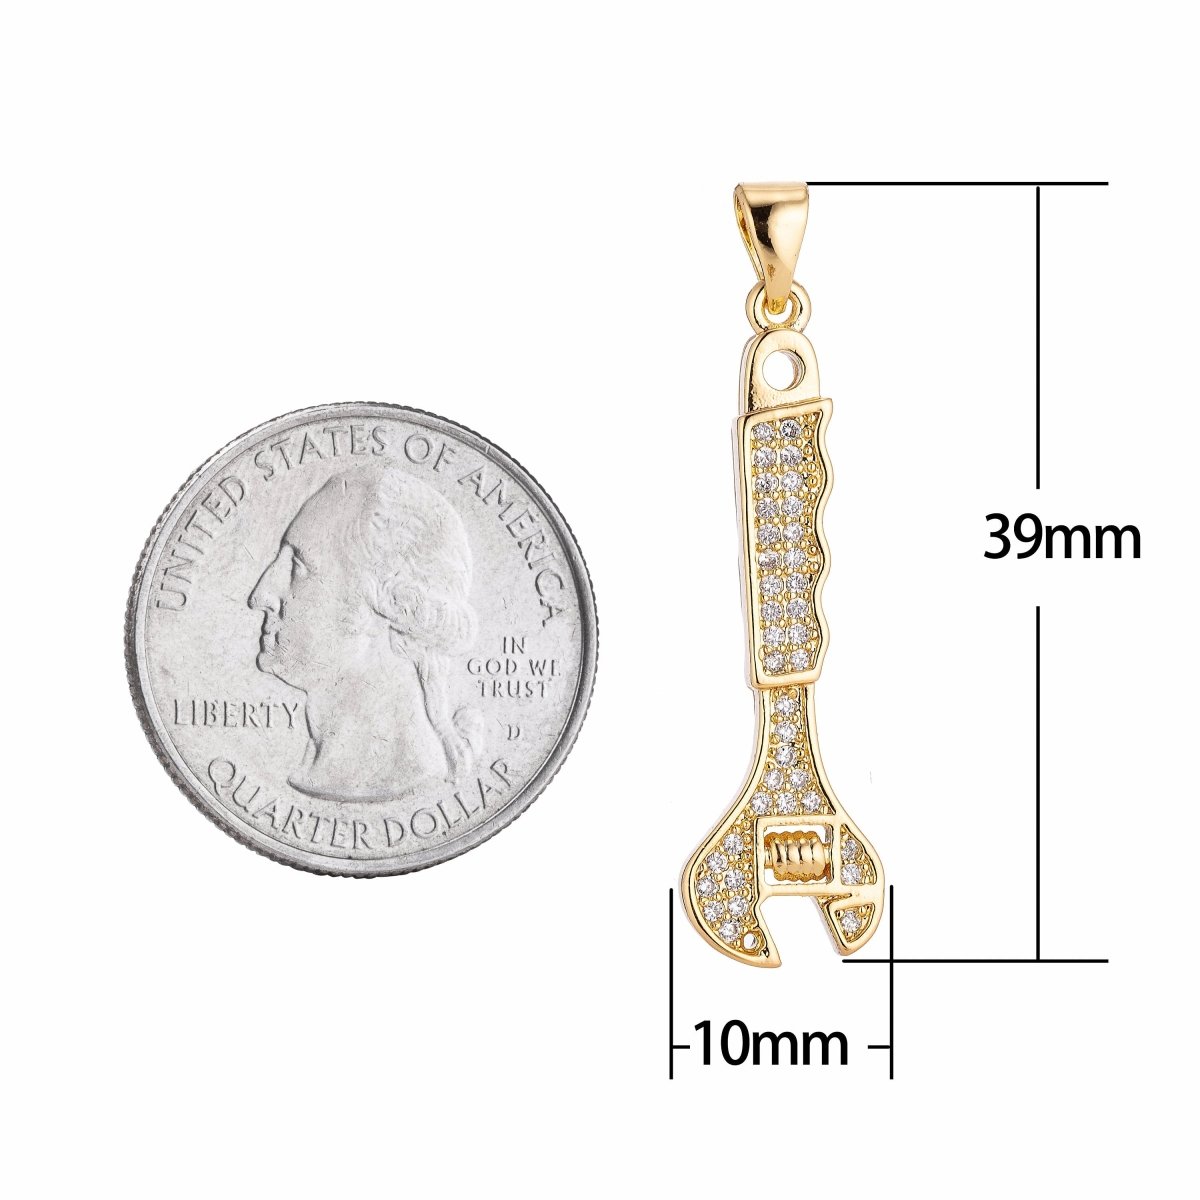 24K Gold Filled Wrenches Tools Pendant Charm with Cubic Zircon (CZ) Rhinestone for DIY Bails Findings for Jewelry Making Supplies H-194 - DLUXCA